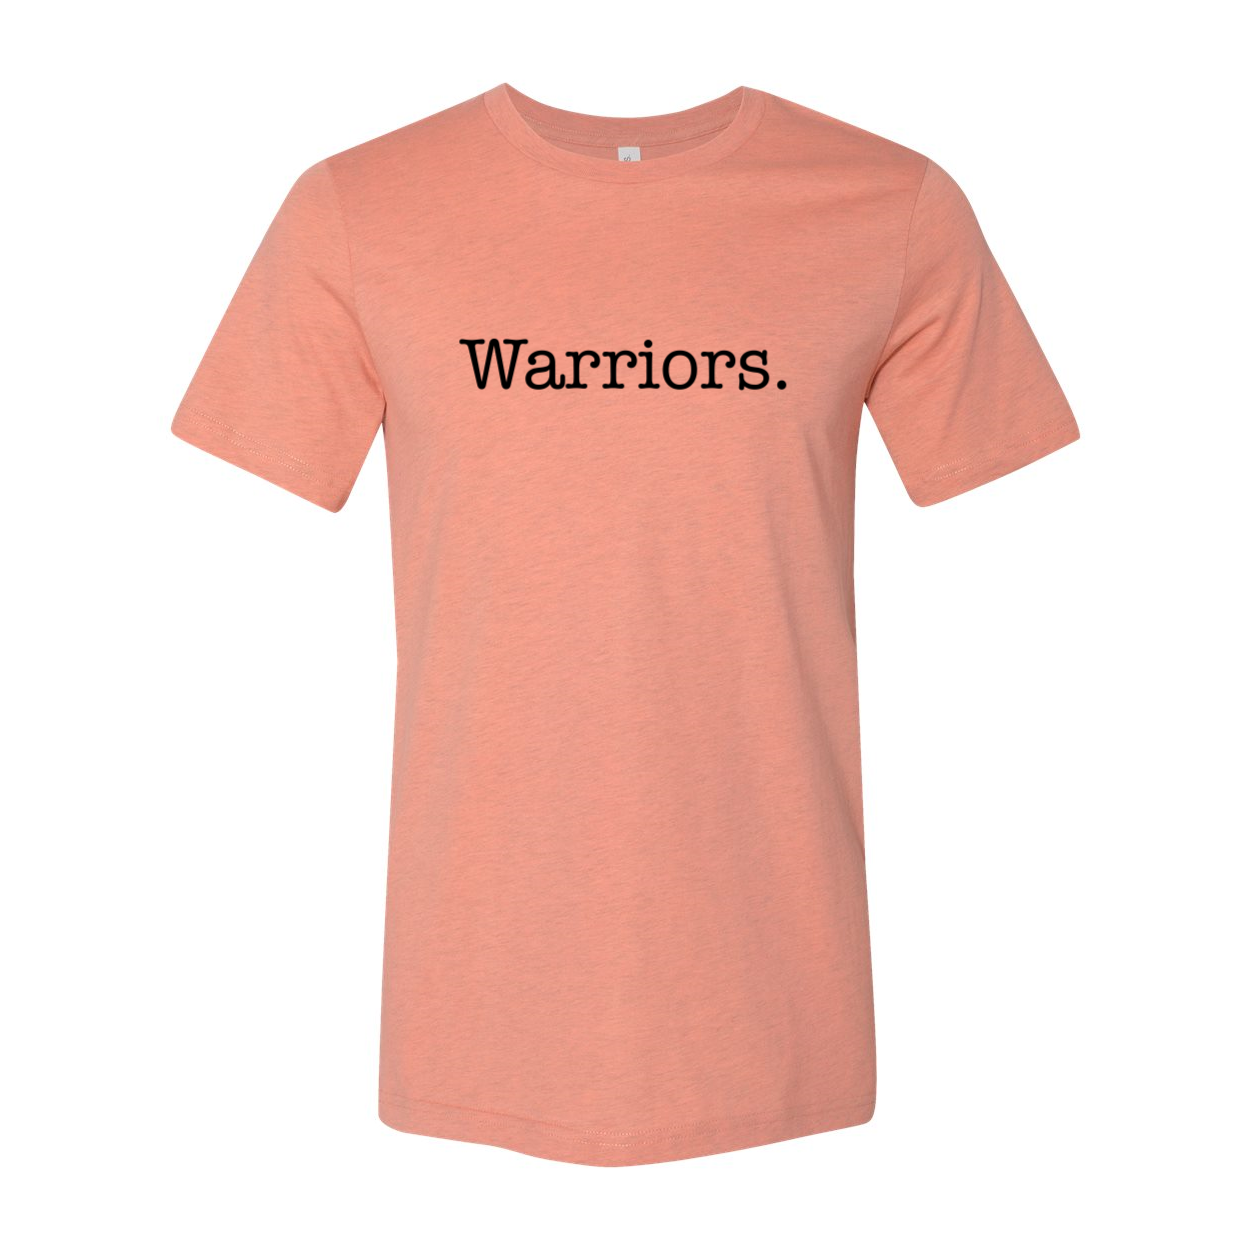 Central Warriors. Soft Tee